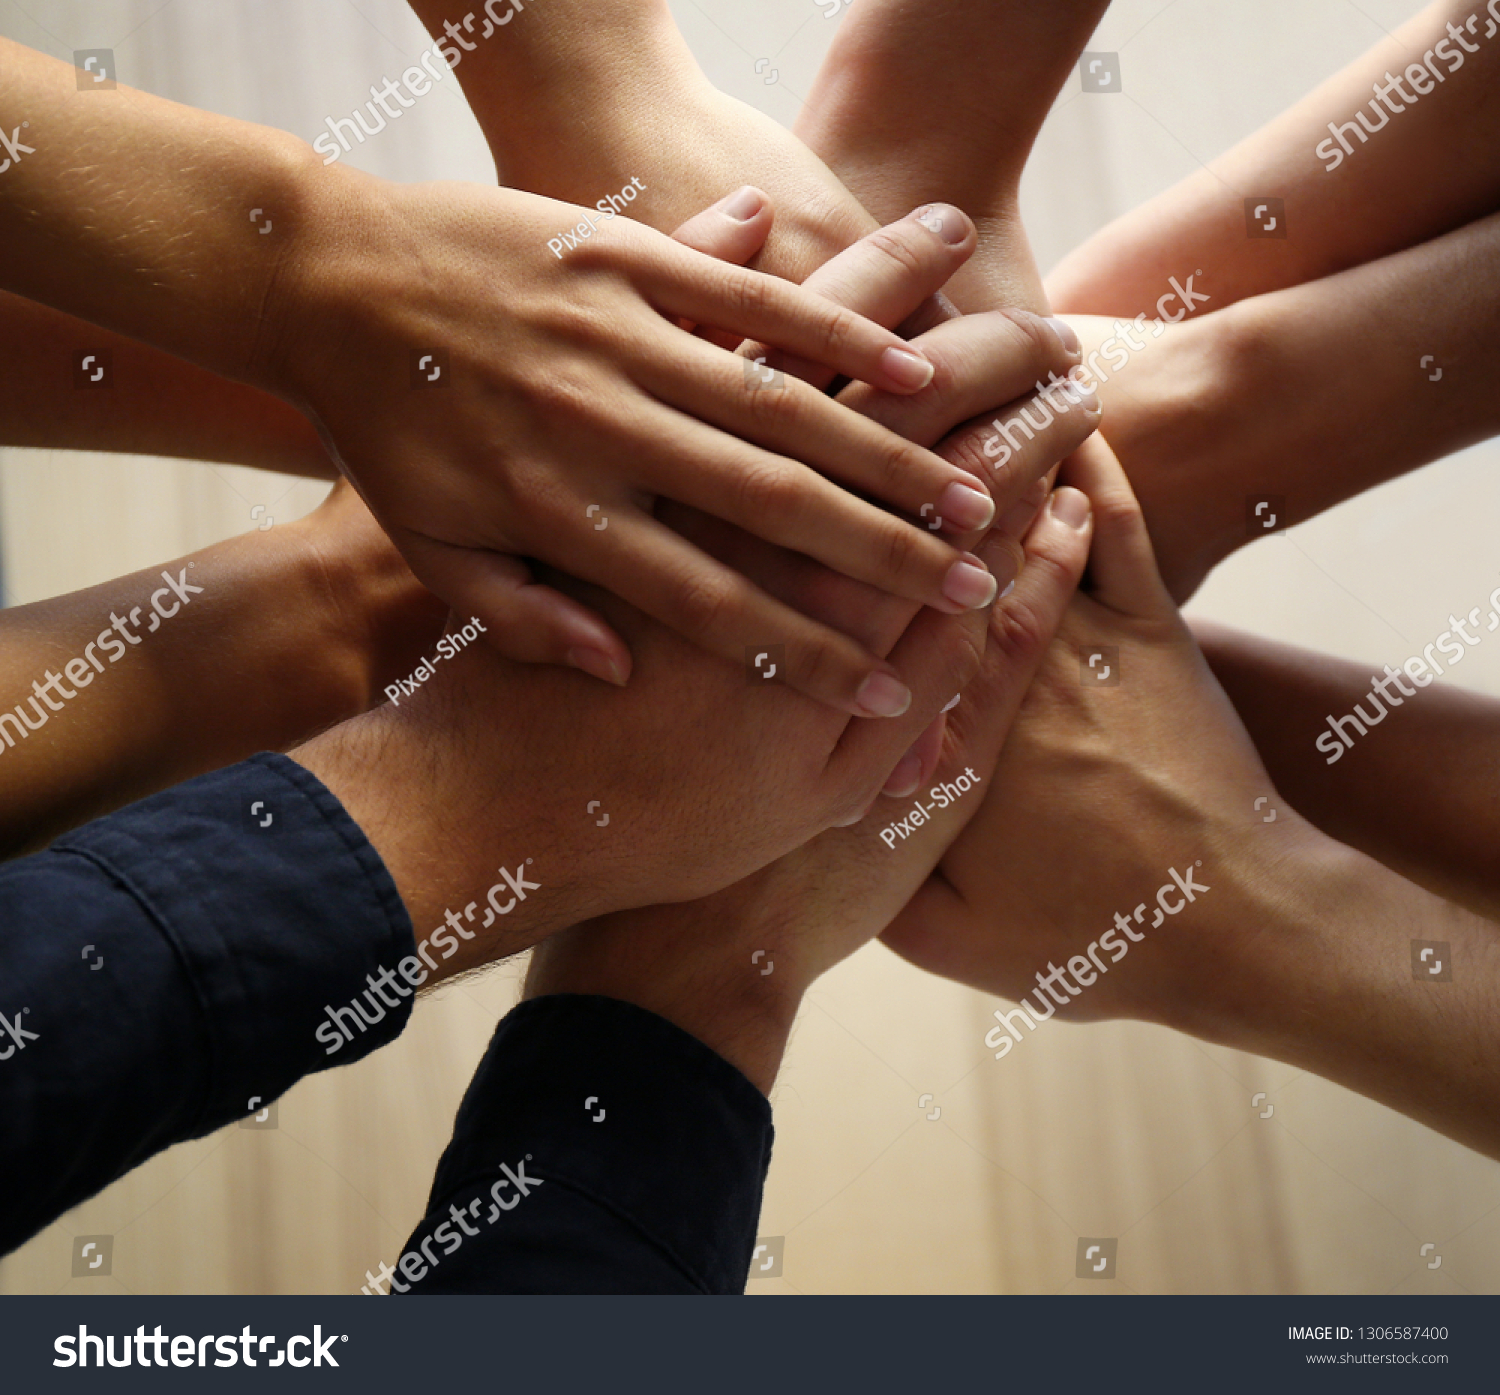 People putting hands together, closeup. Unity concept #1306587400